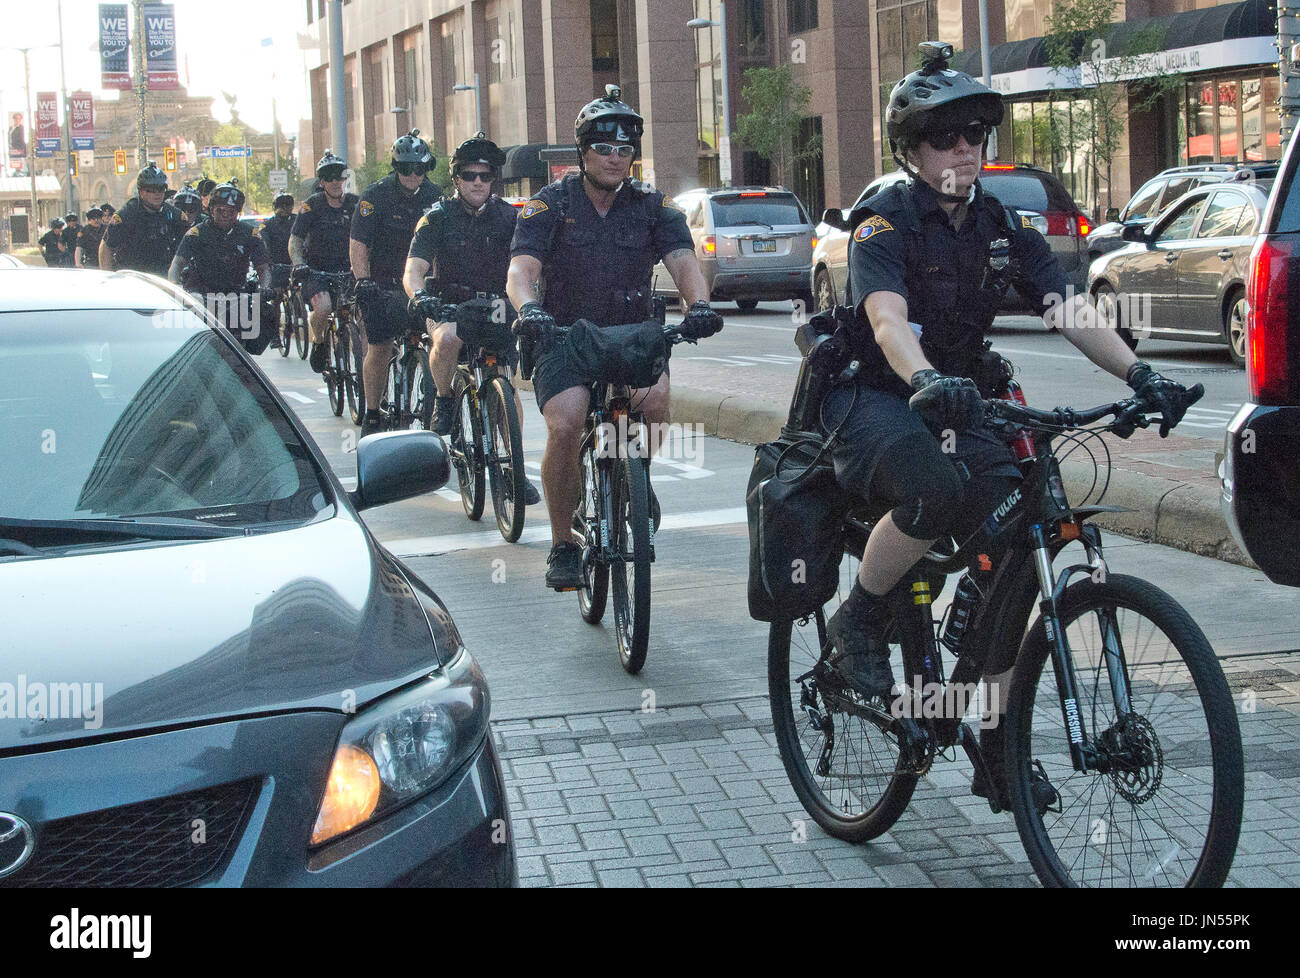 Police officers on bicycles ride down Euclid Avenue about two blocks from the Quicken Loans Arena, site of the 2016 Republican National Convention in Cleveland, Ohio on Saturday, July 16, 2016. Credit: Ron Sachs / CNP (RESTRICTION: NO New York or New Jersey Newspapers or newspapers within a 75 mile radius of New York City) Stock Photo